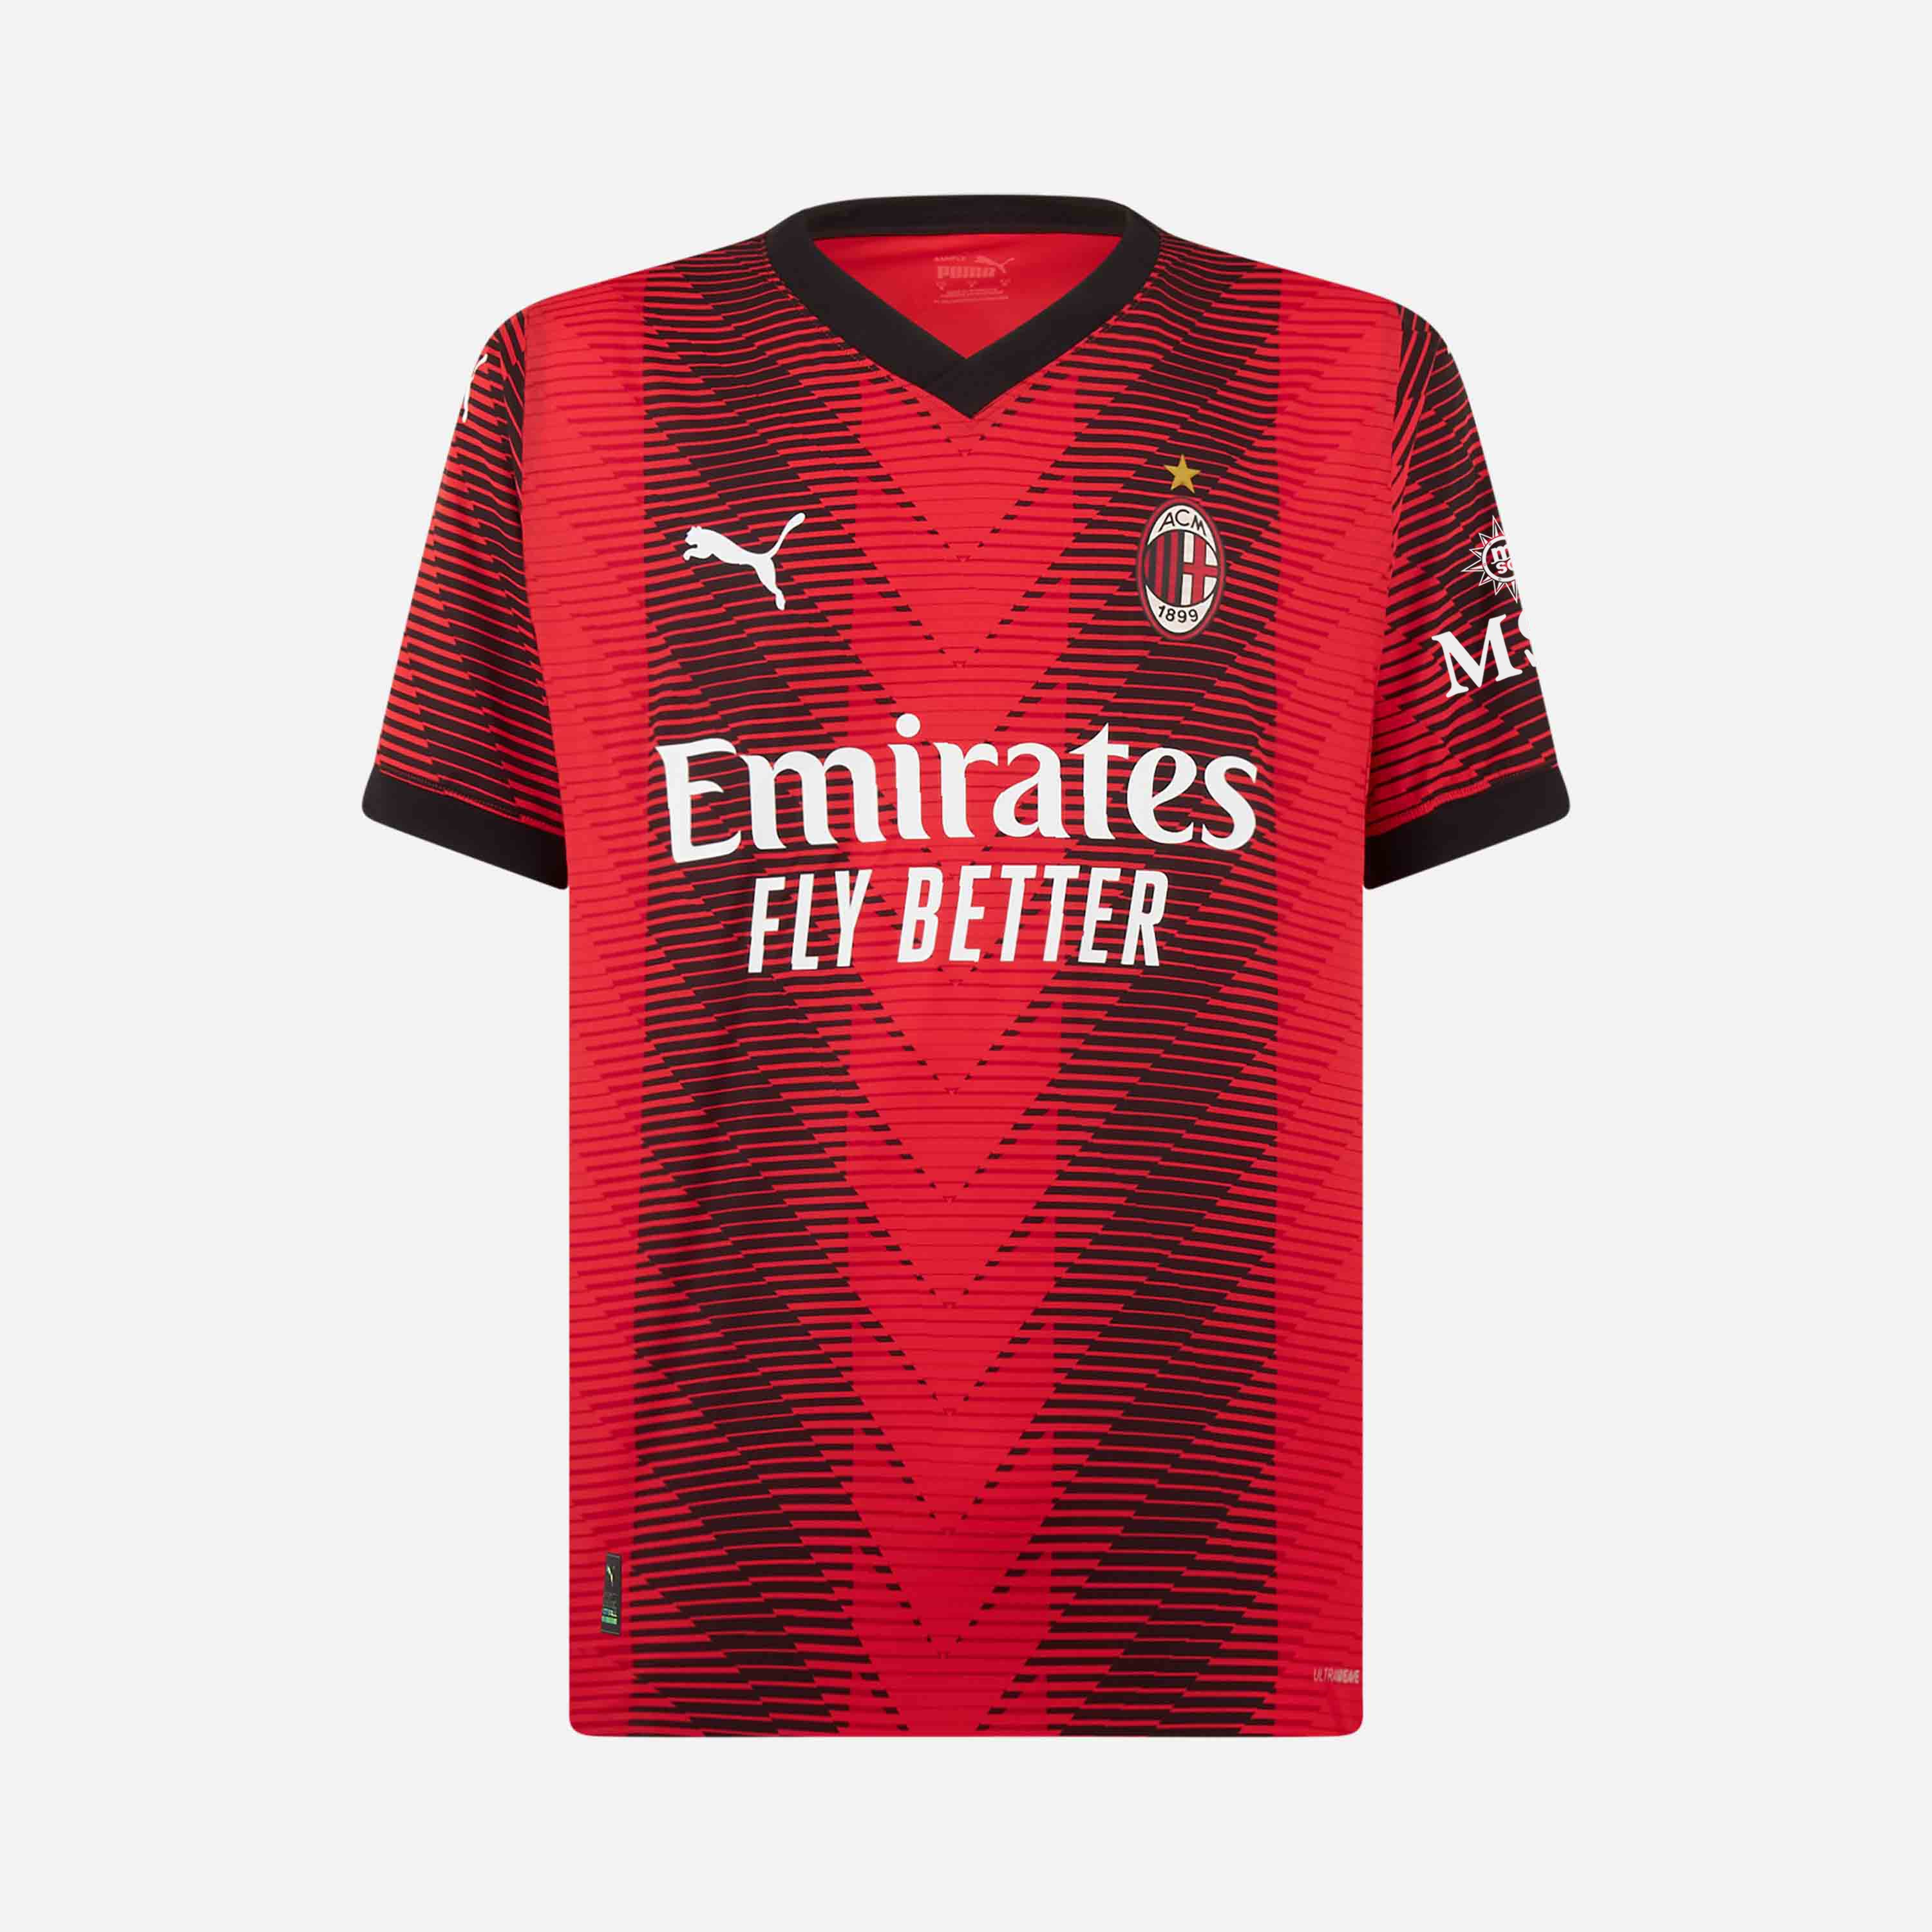 AC Milan & Off-White™ Return With Second Uniforms Collection